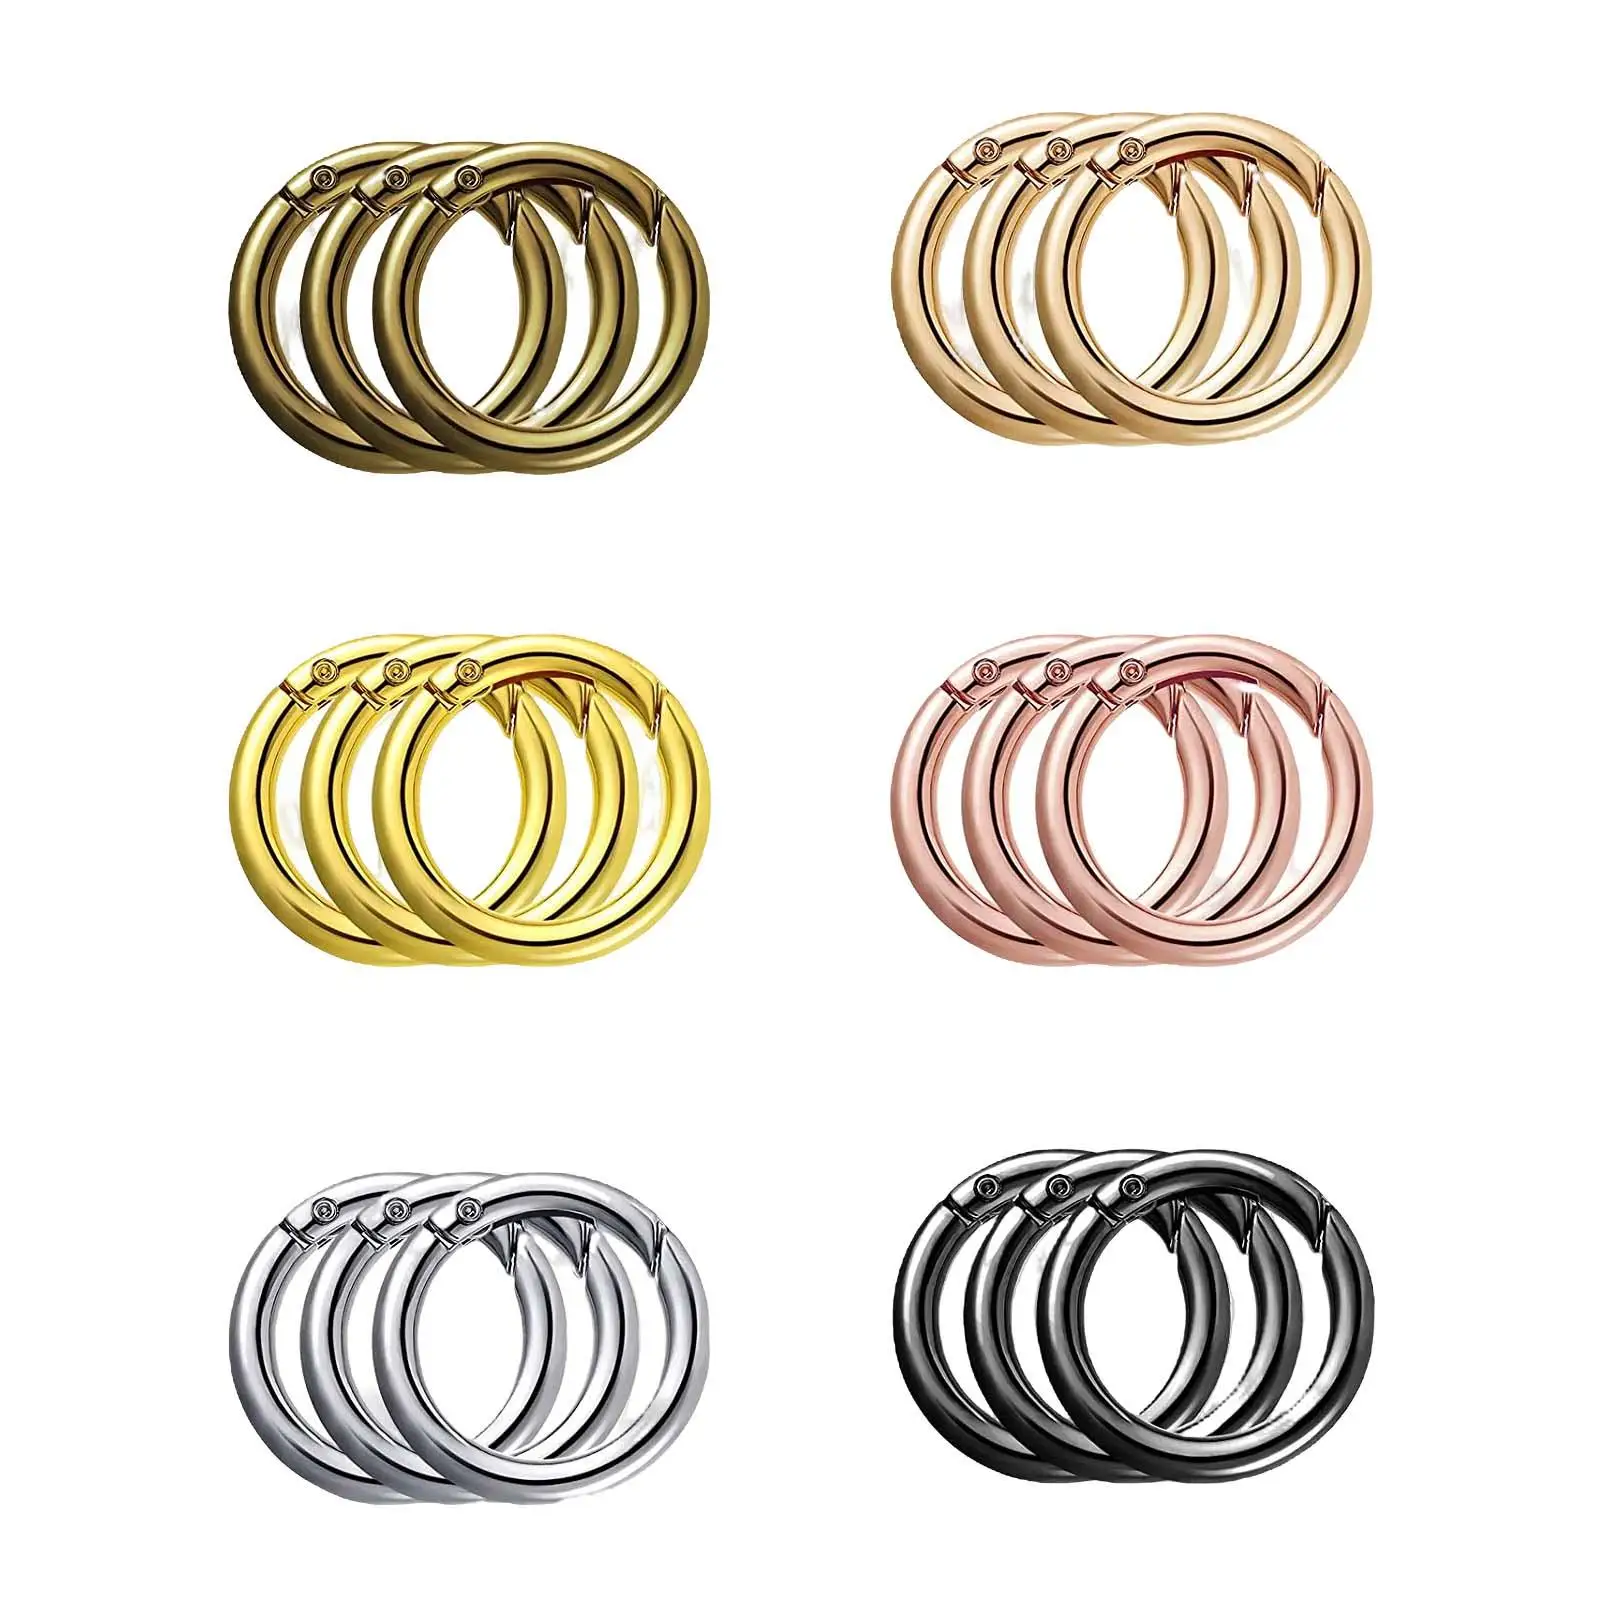 18Pcs Keyring 25MM Openable Metal Spring Gate O Ring Bag Belt Strap Buckle Dog Chain Snap Clasp Clip Luggage